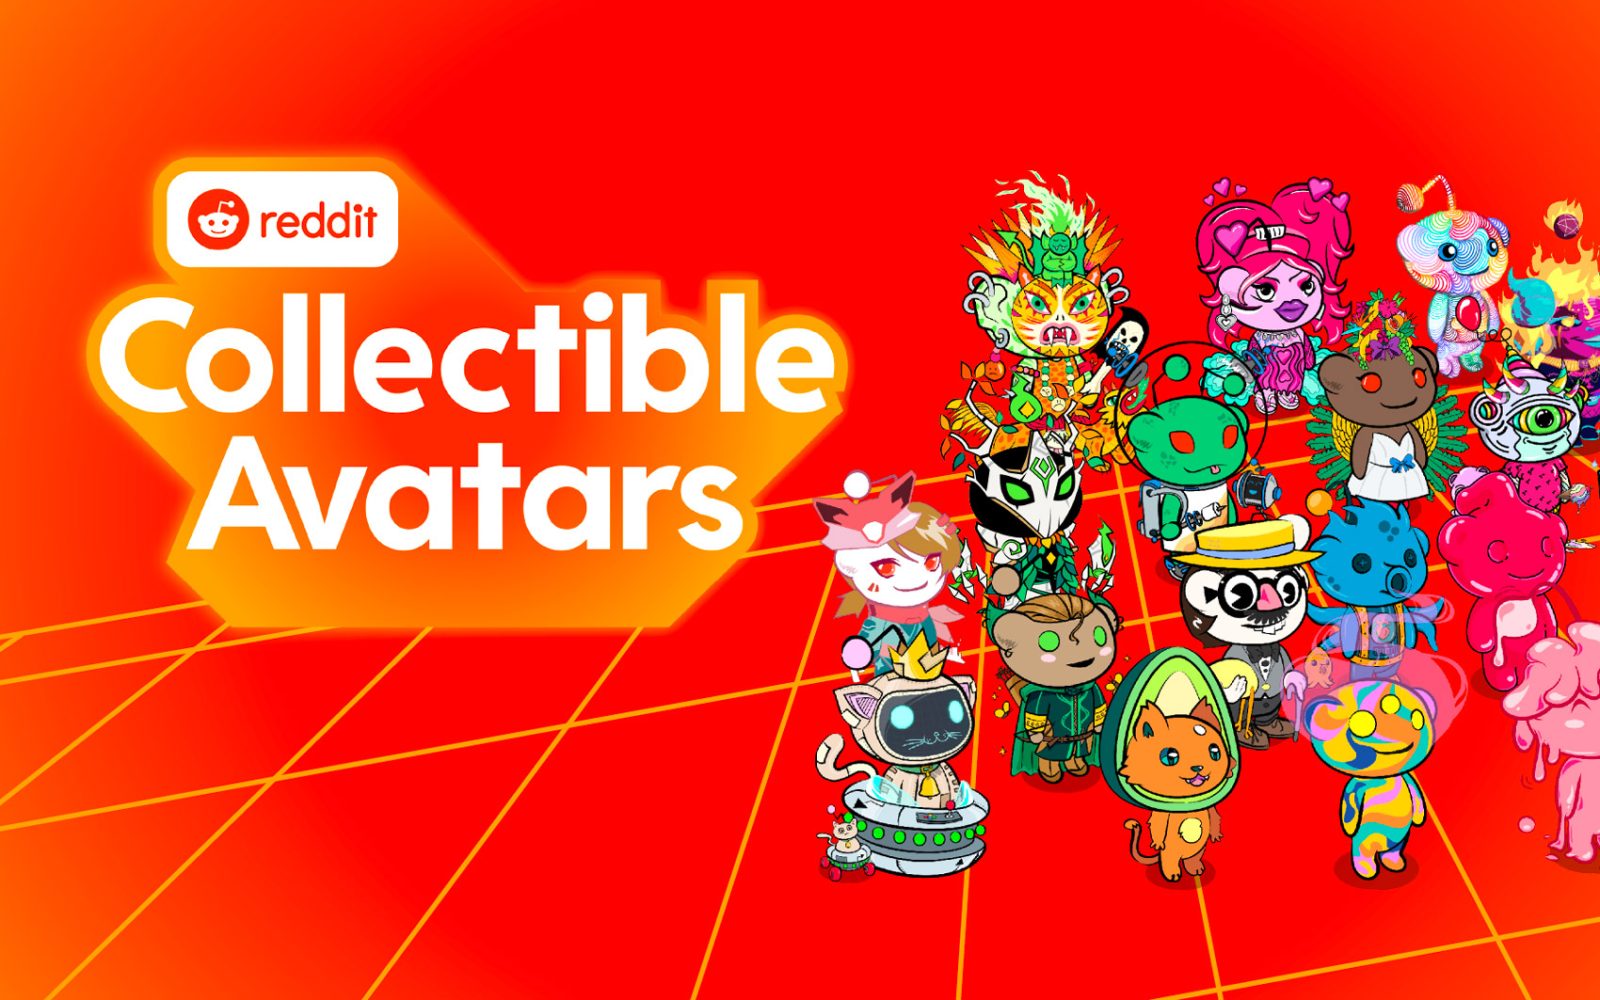 Reddit announces limited edition blockchain-backed avatars for its users